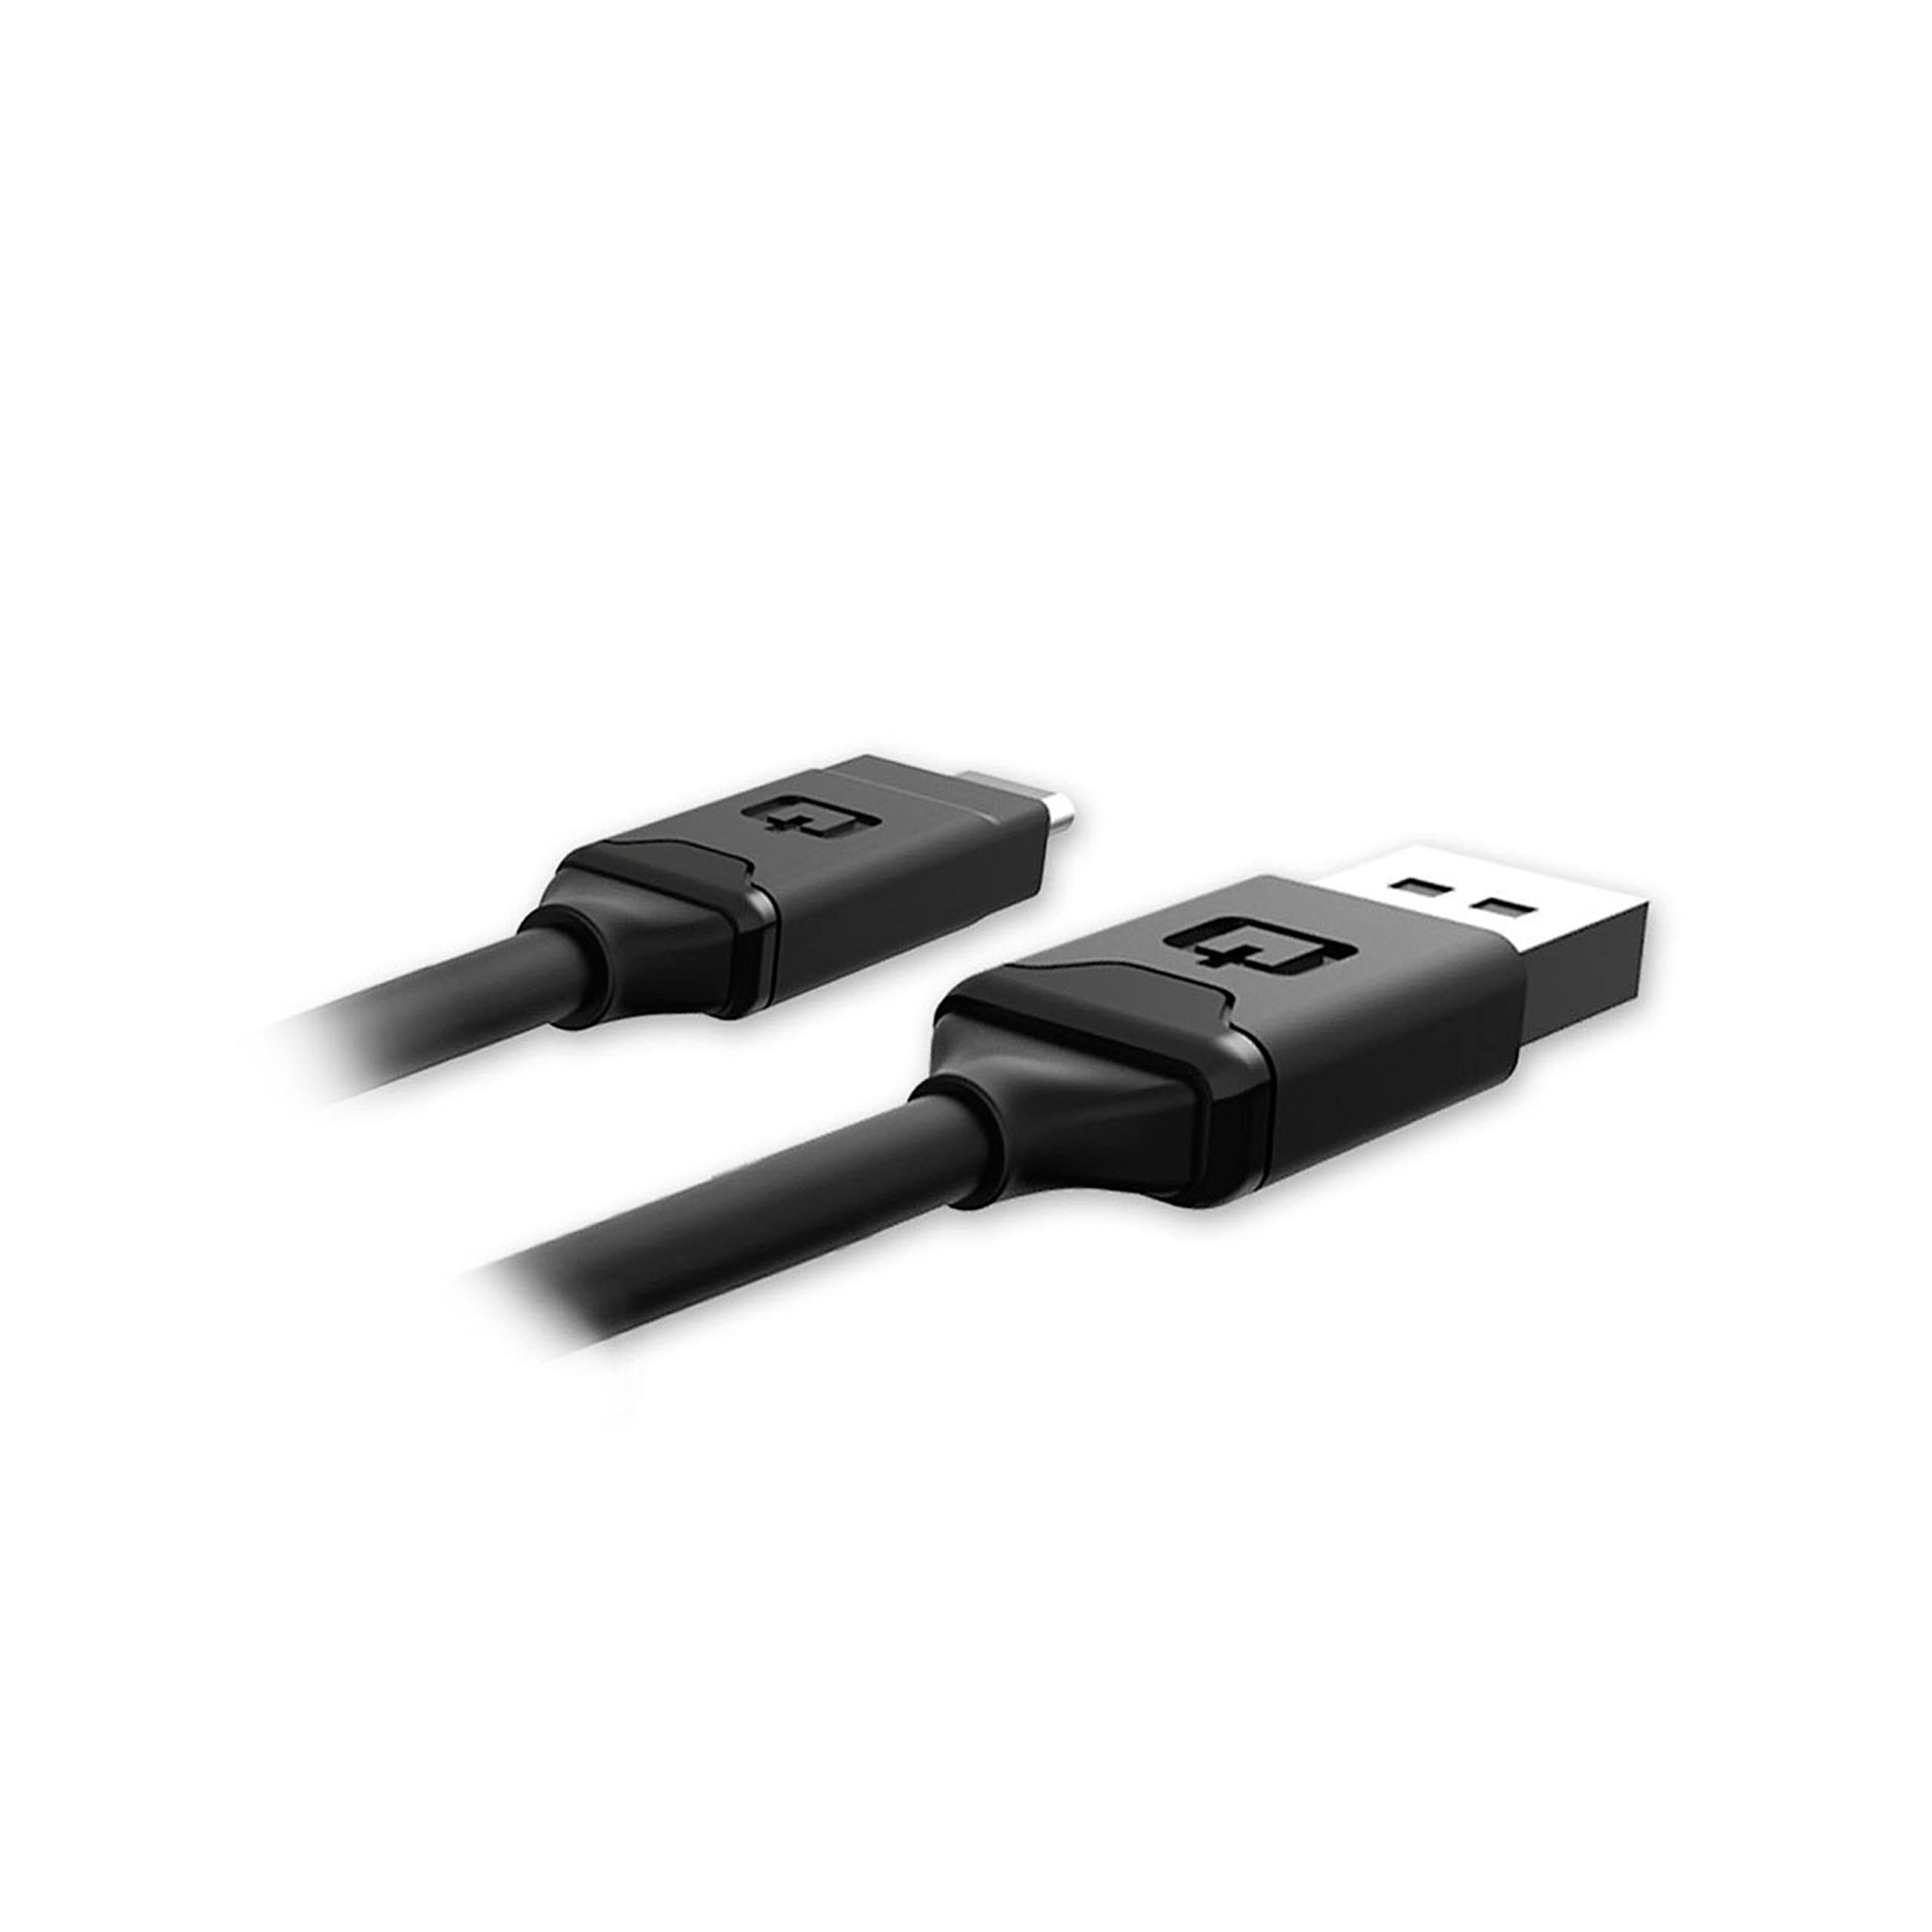 Qmadix - Type A To Type C 2.0 Cable 6ft - Black